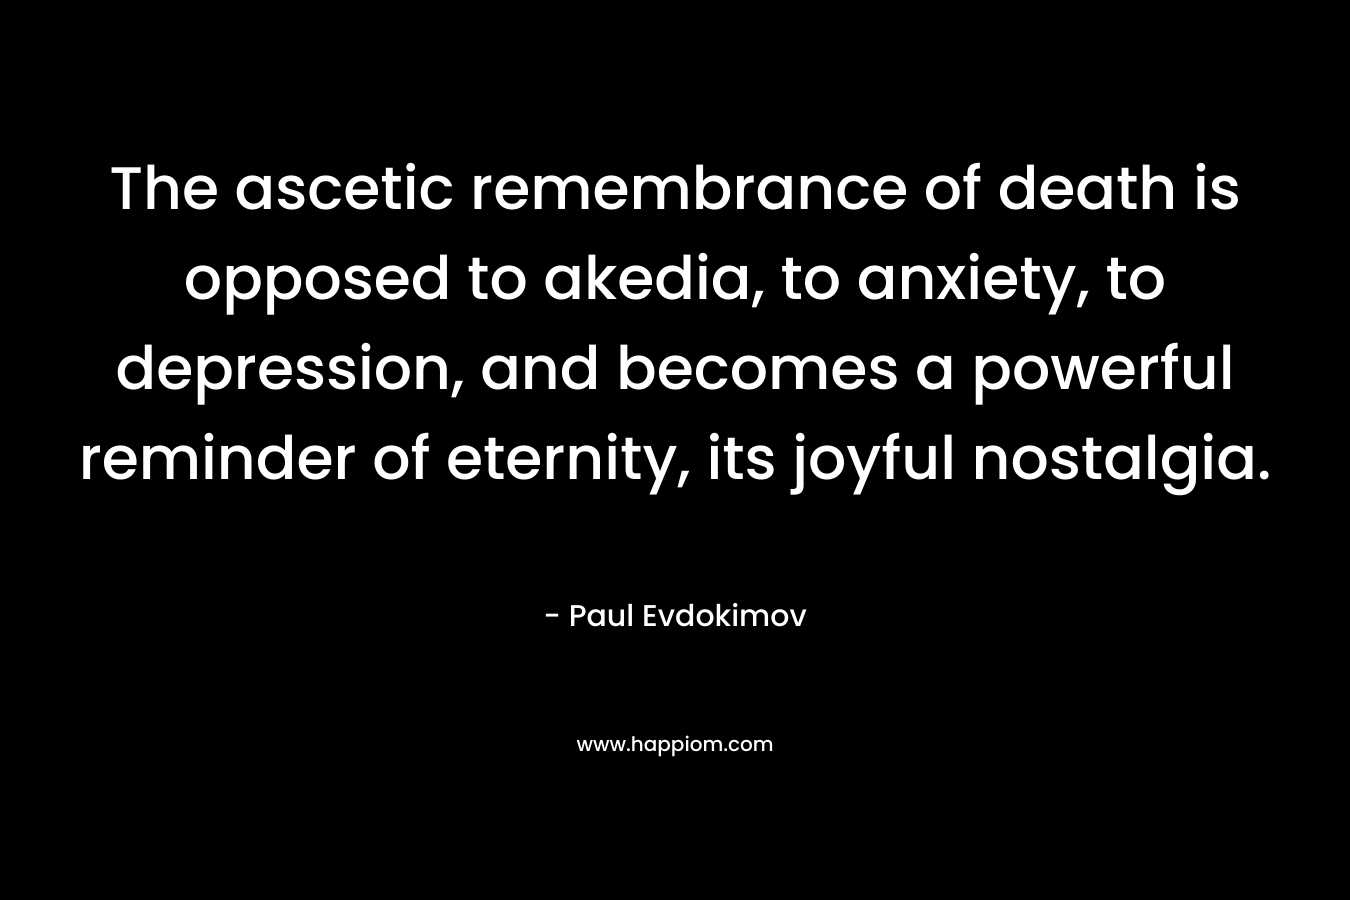 The ascetic remembrance of death is opposed to akedia, to anxiety, to depression, and becomes a powerful reminder of eternity, its joyful nostalgia. – Paul Evdokimov